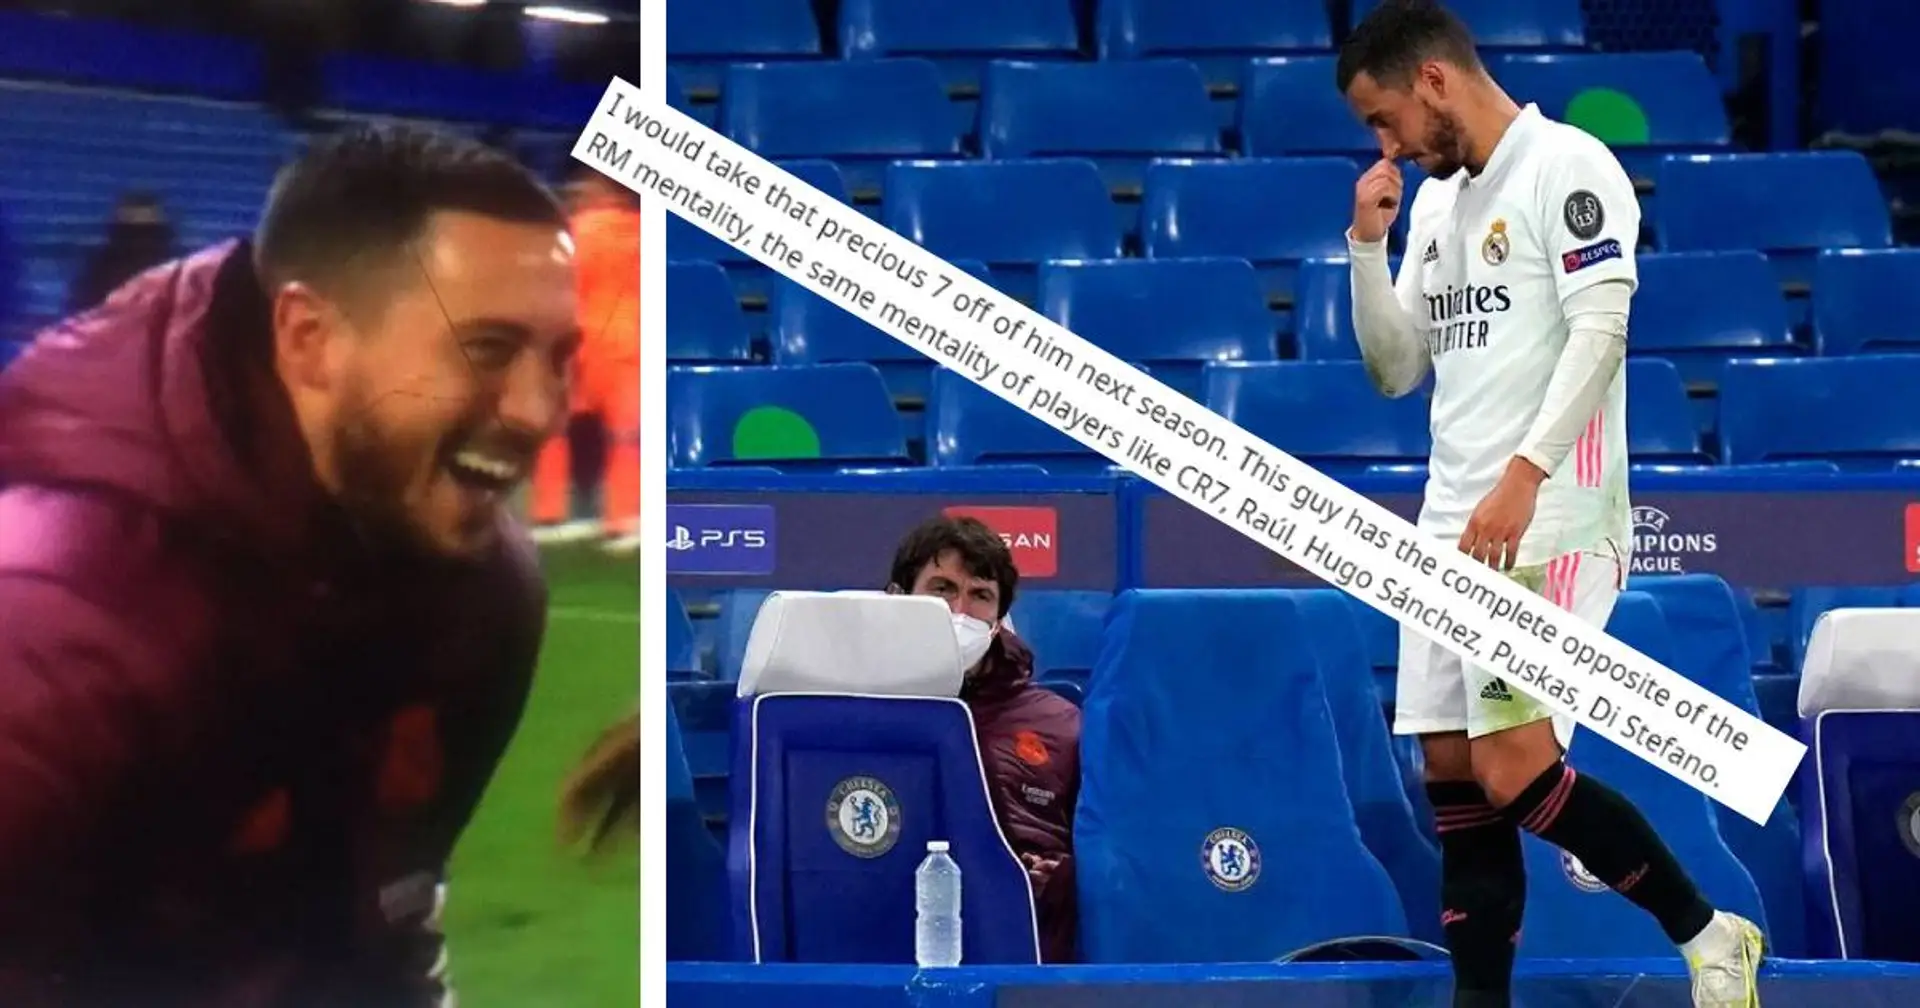 'I would take that precious 7 off of him next season': fans fuming after Hazard no-show vs Chelsea